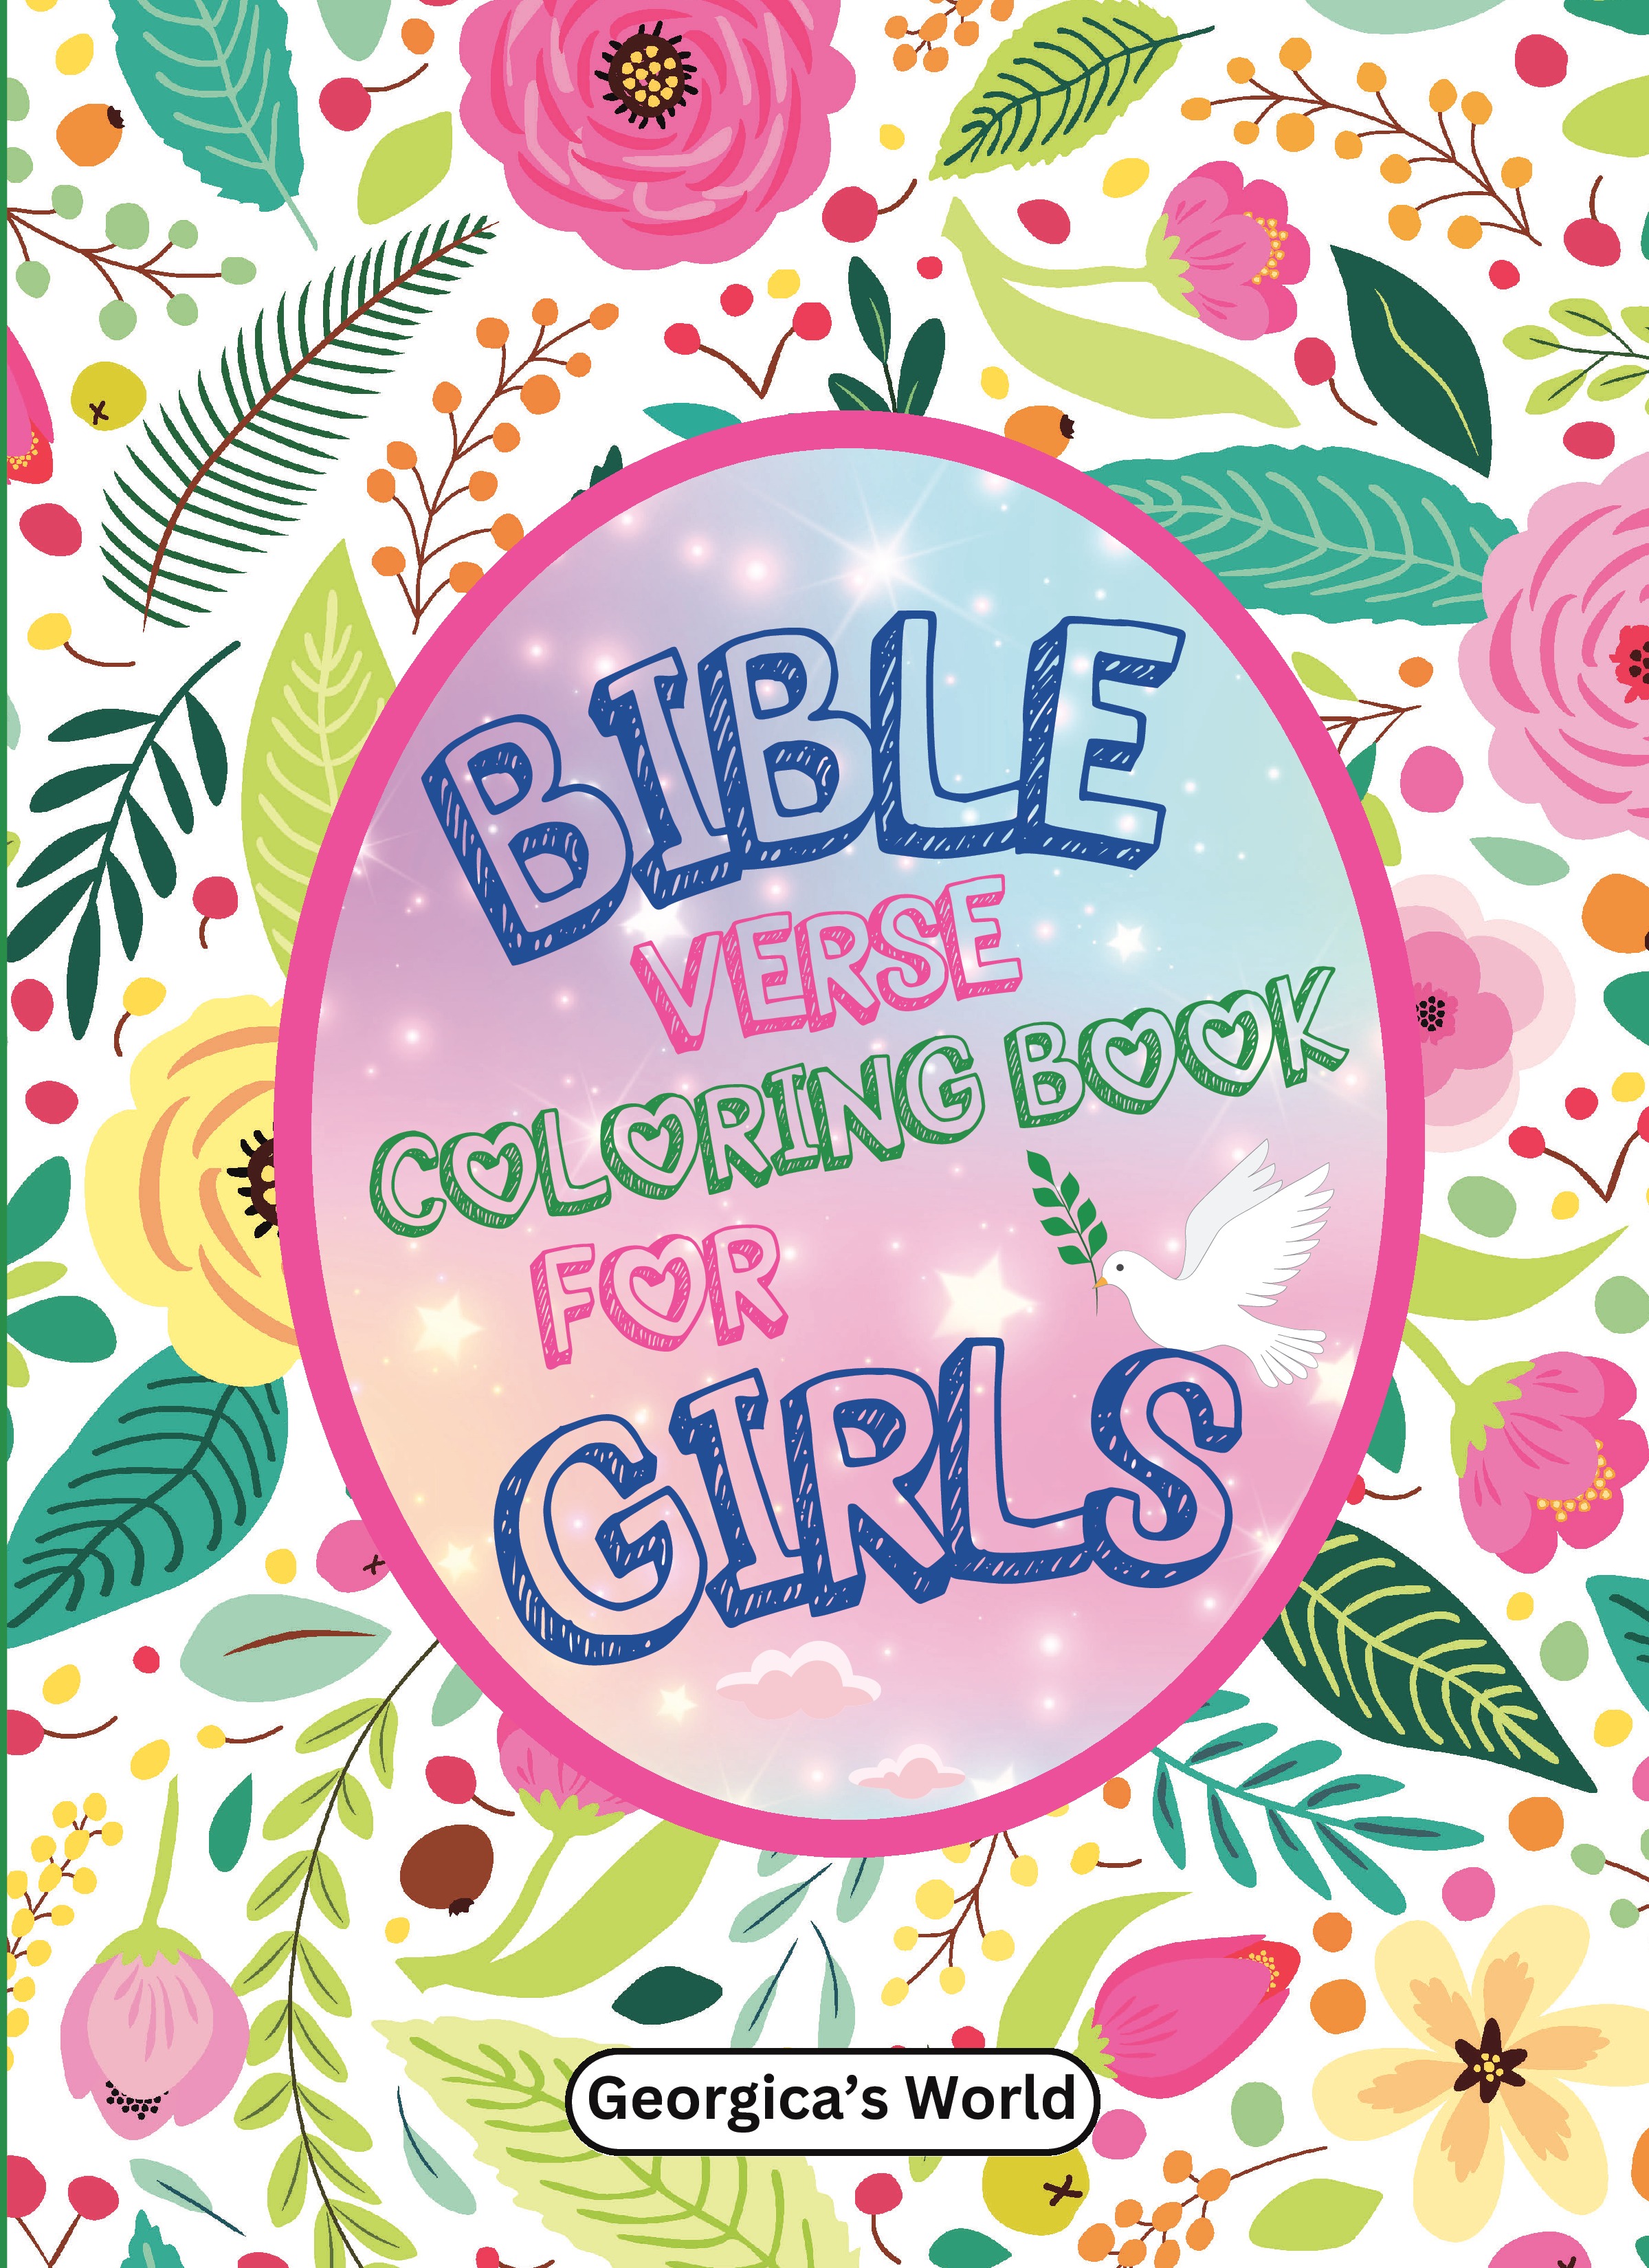 Coloring Book for Girls Age 8 -12: Inspirational and Motivational (Coloring  Books for Kids)